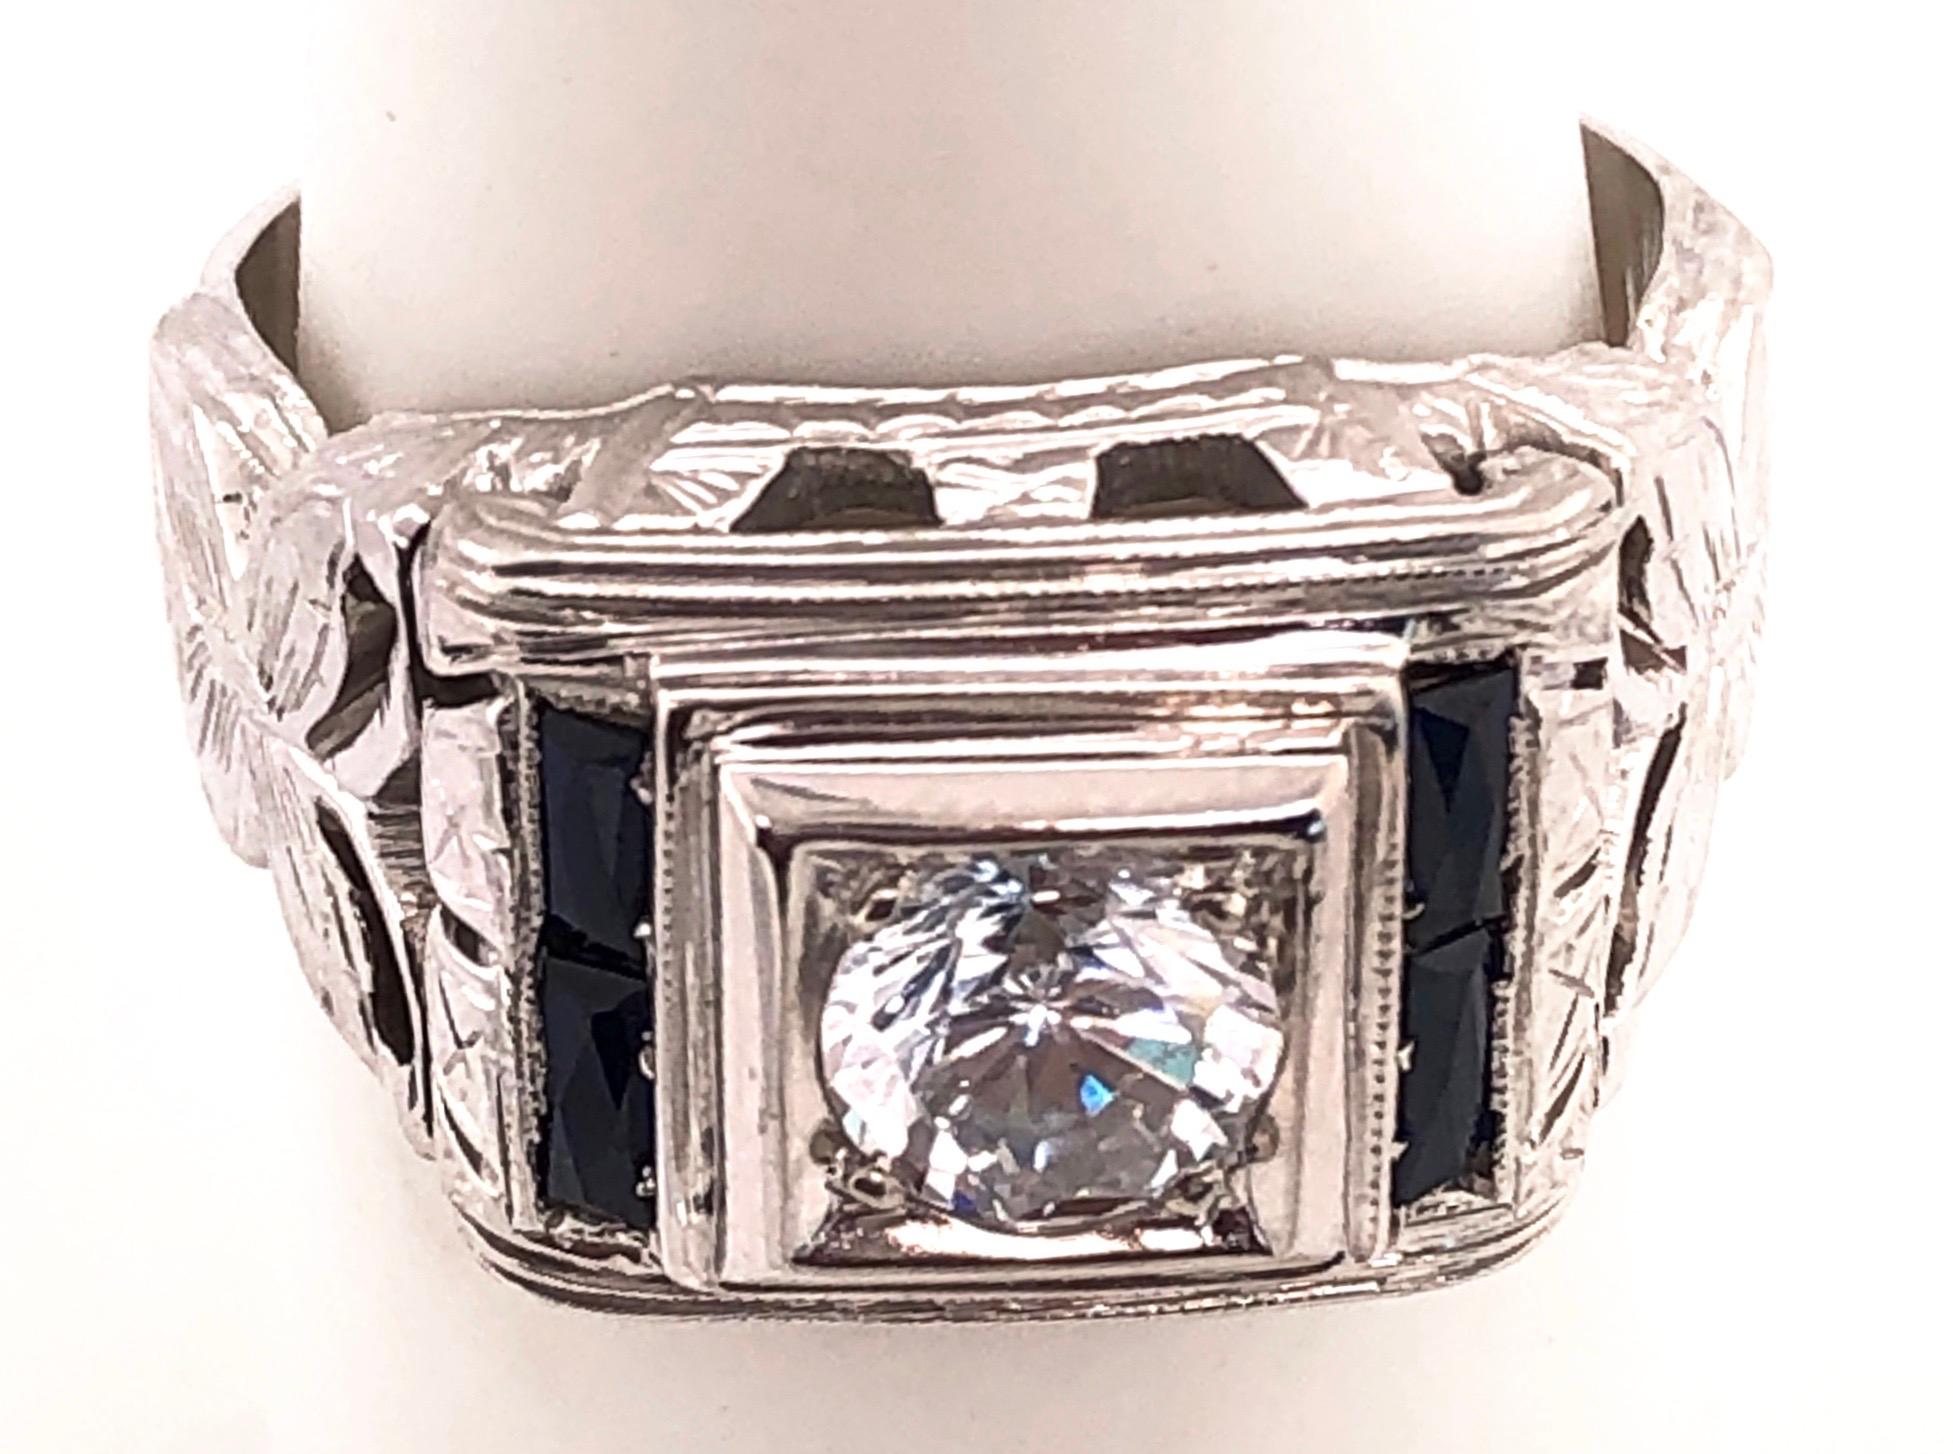 14 Karat White Gold Fashion Ring with Round Diamond and Sapphires In Good Condition For Sale In Stamford, CT